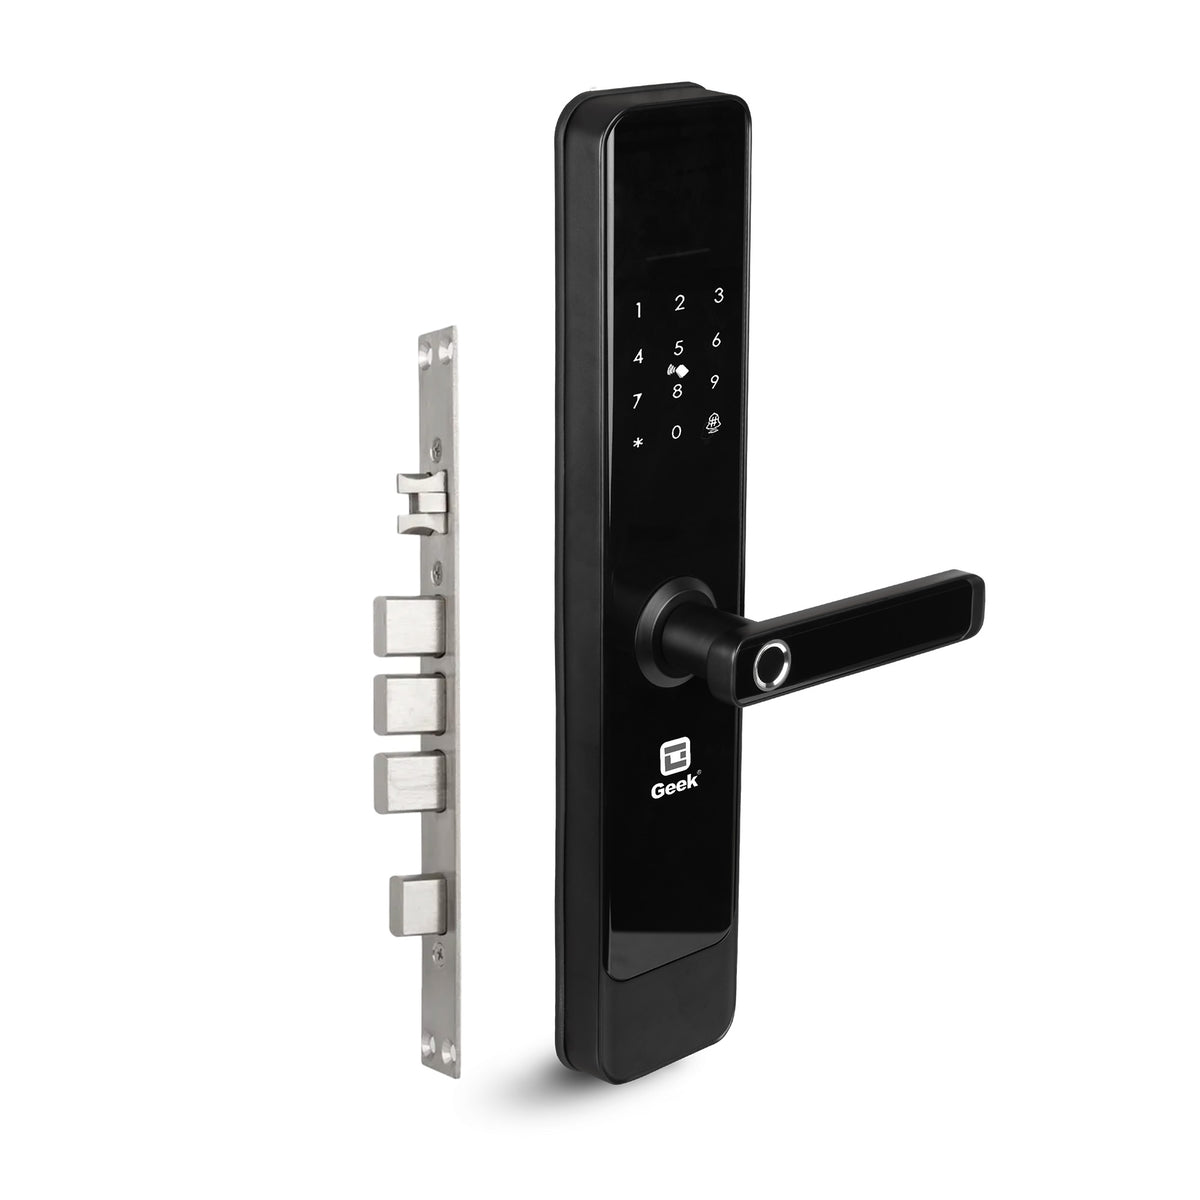 Geek E908 Wi-Fi Enabled 5-in-1 Smart Digital Door Lock With 5 Locking Bolts, App Support and Biometric Fingerprint Access (Black)